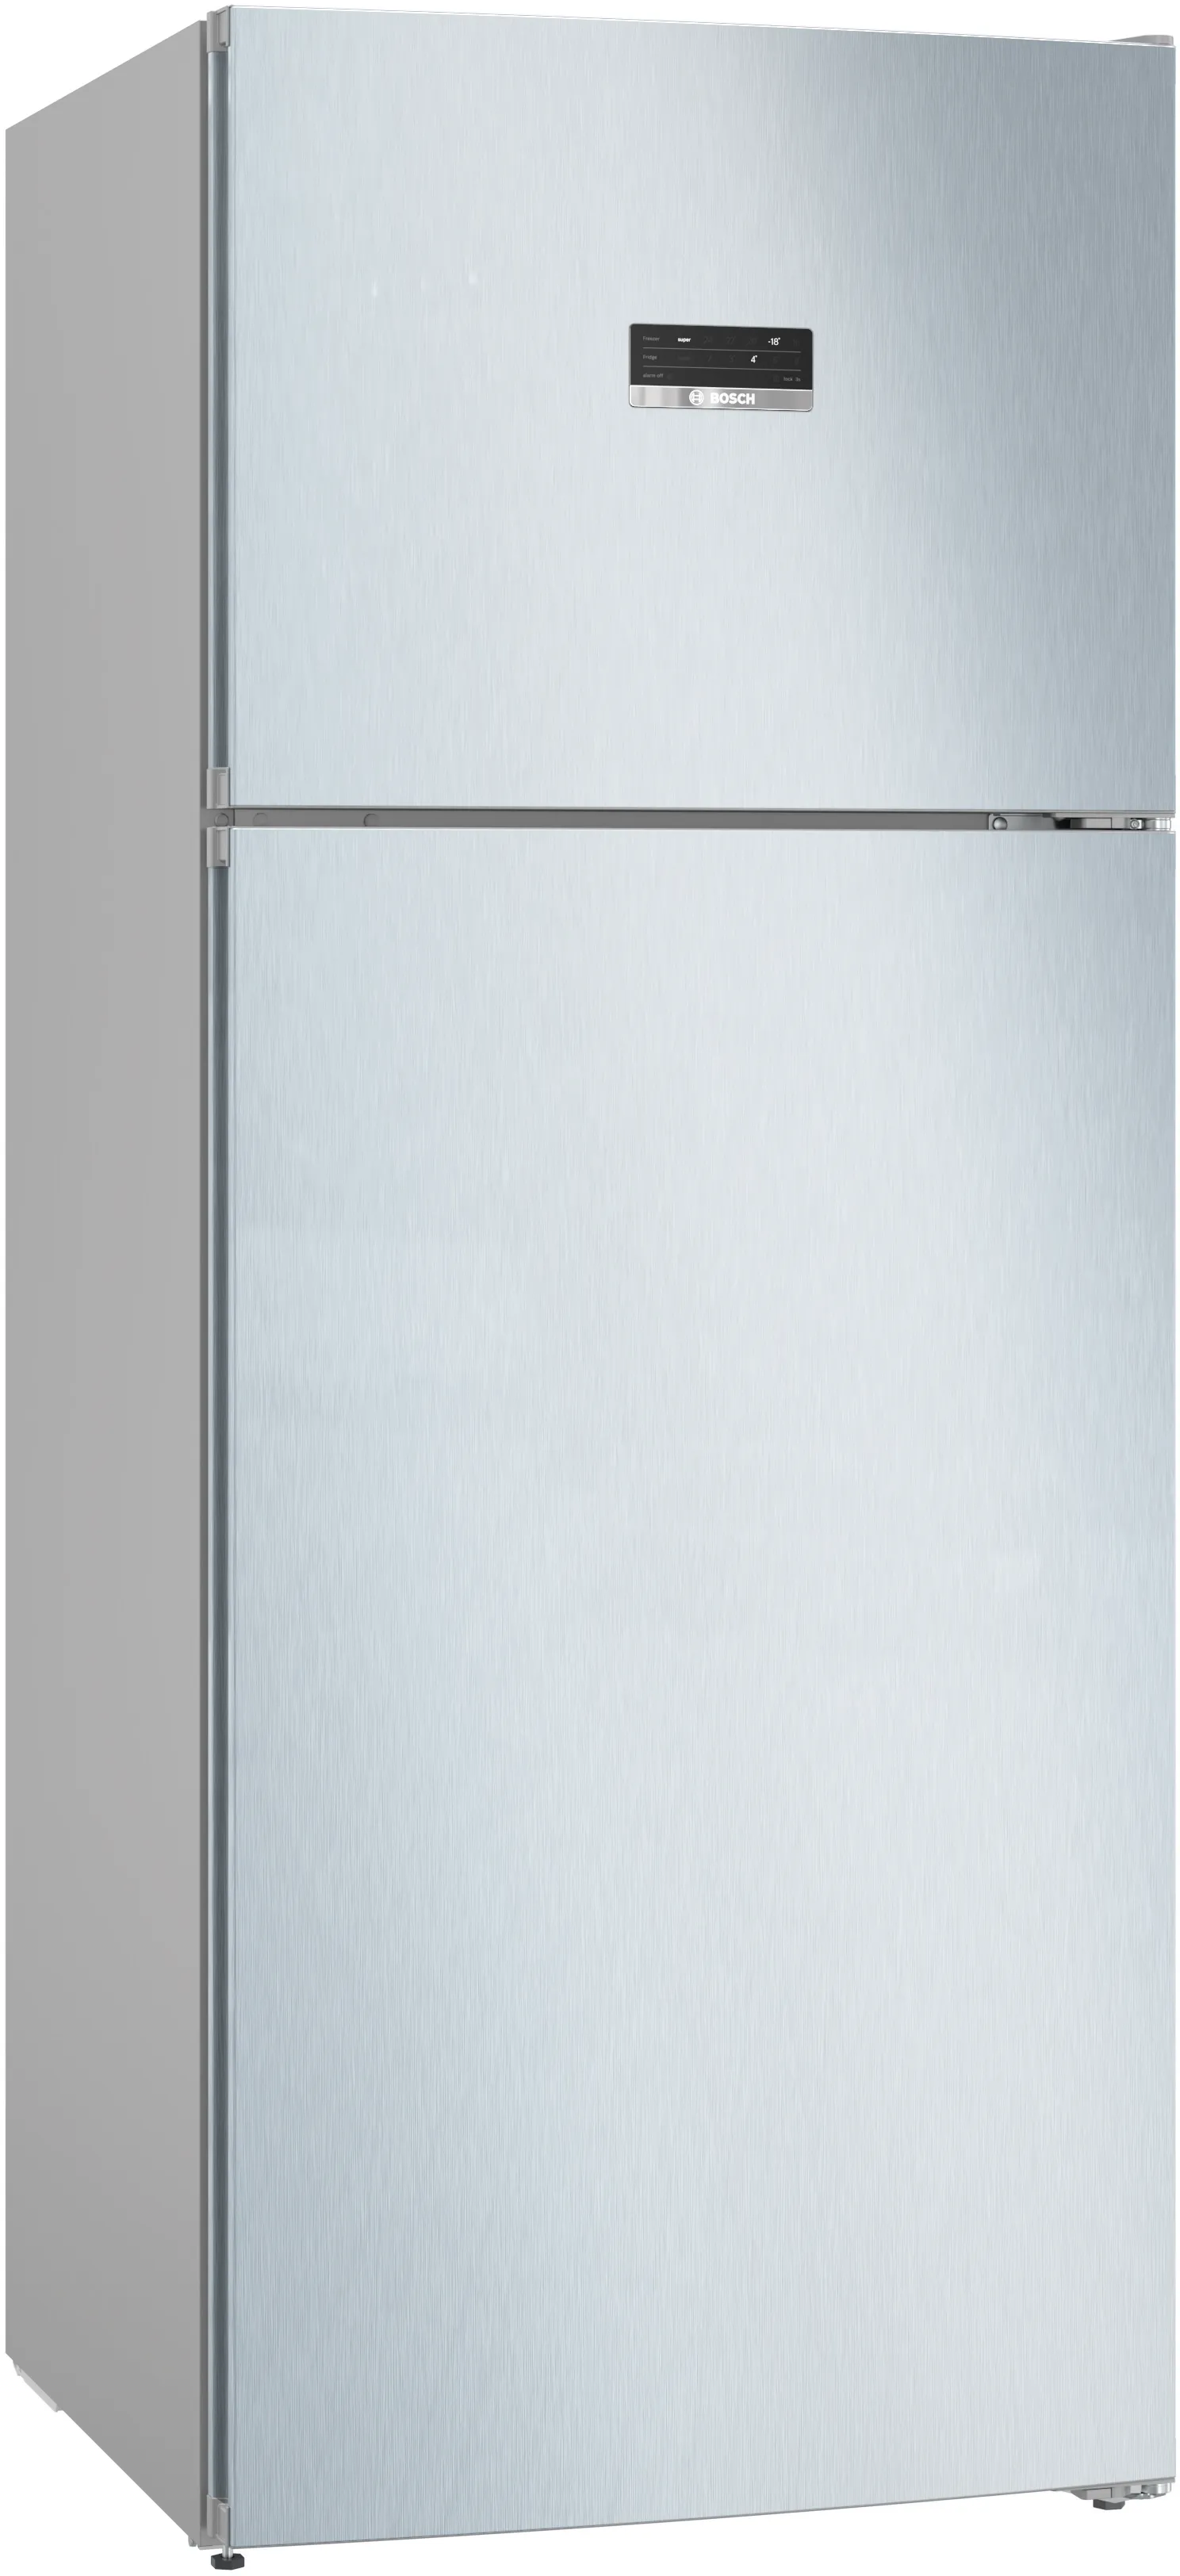 Series 4 free-standing fridge-freezer with freezer at top 186 x 75 cm Stainless steel look 